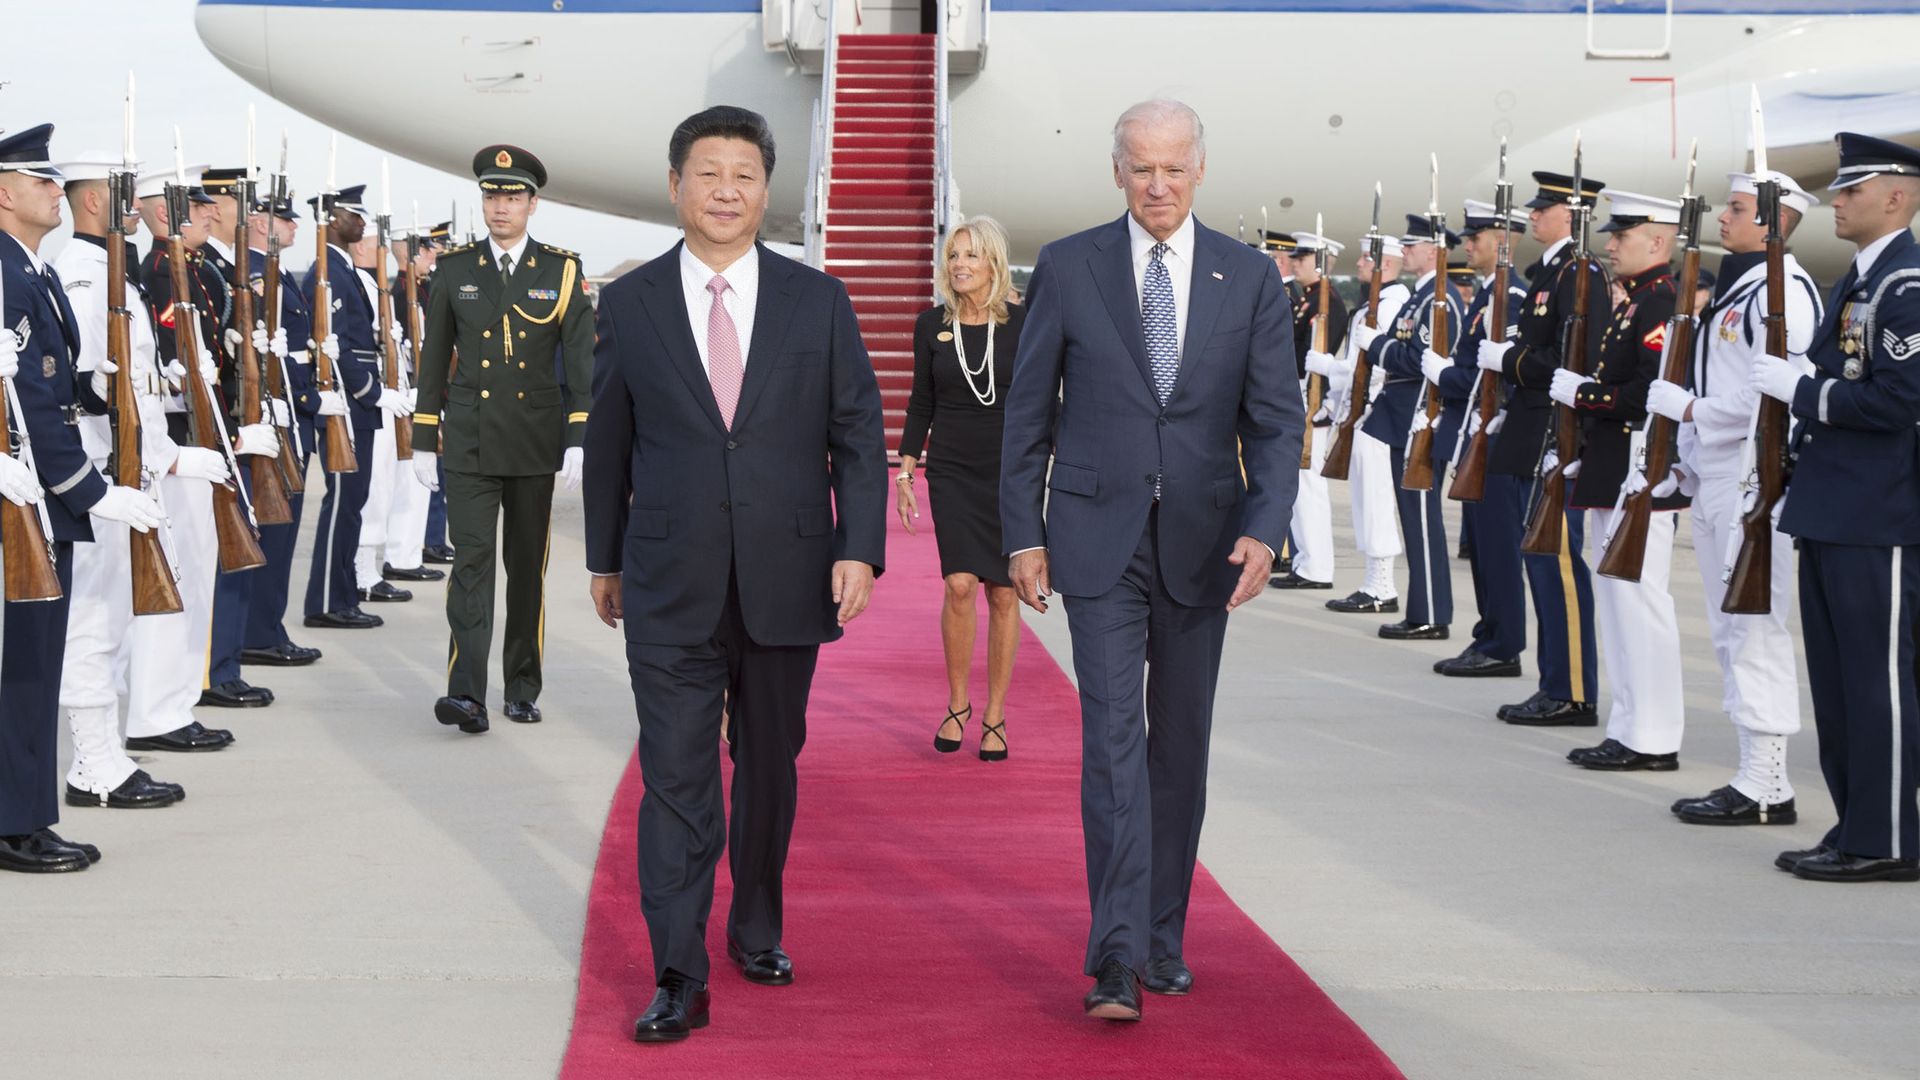 Chinese President Xi Jinping and then-Vice President Biden meet in China